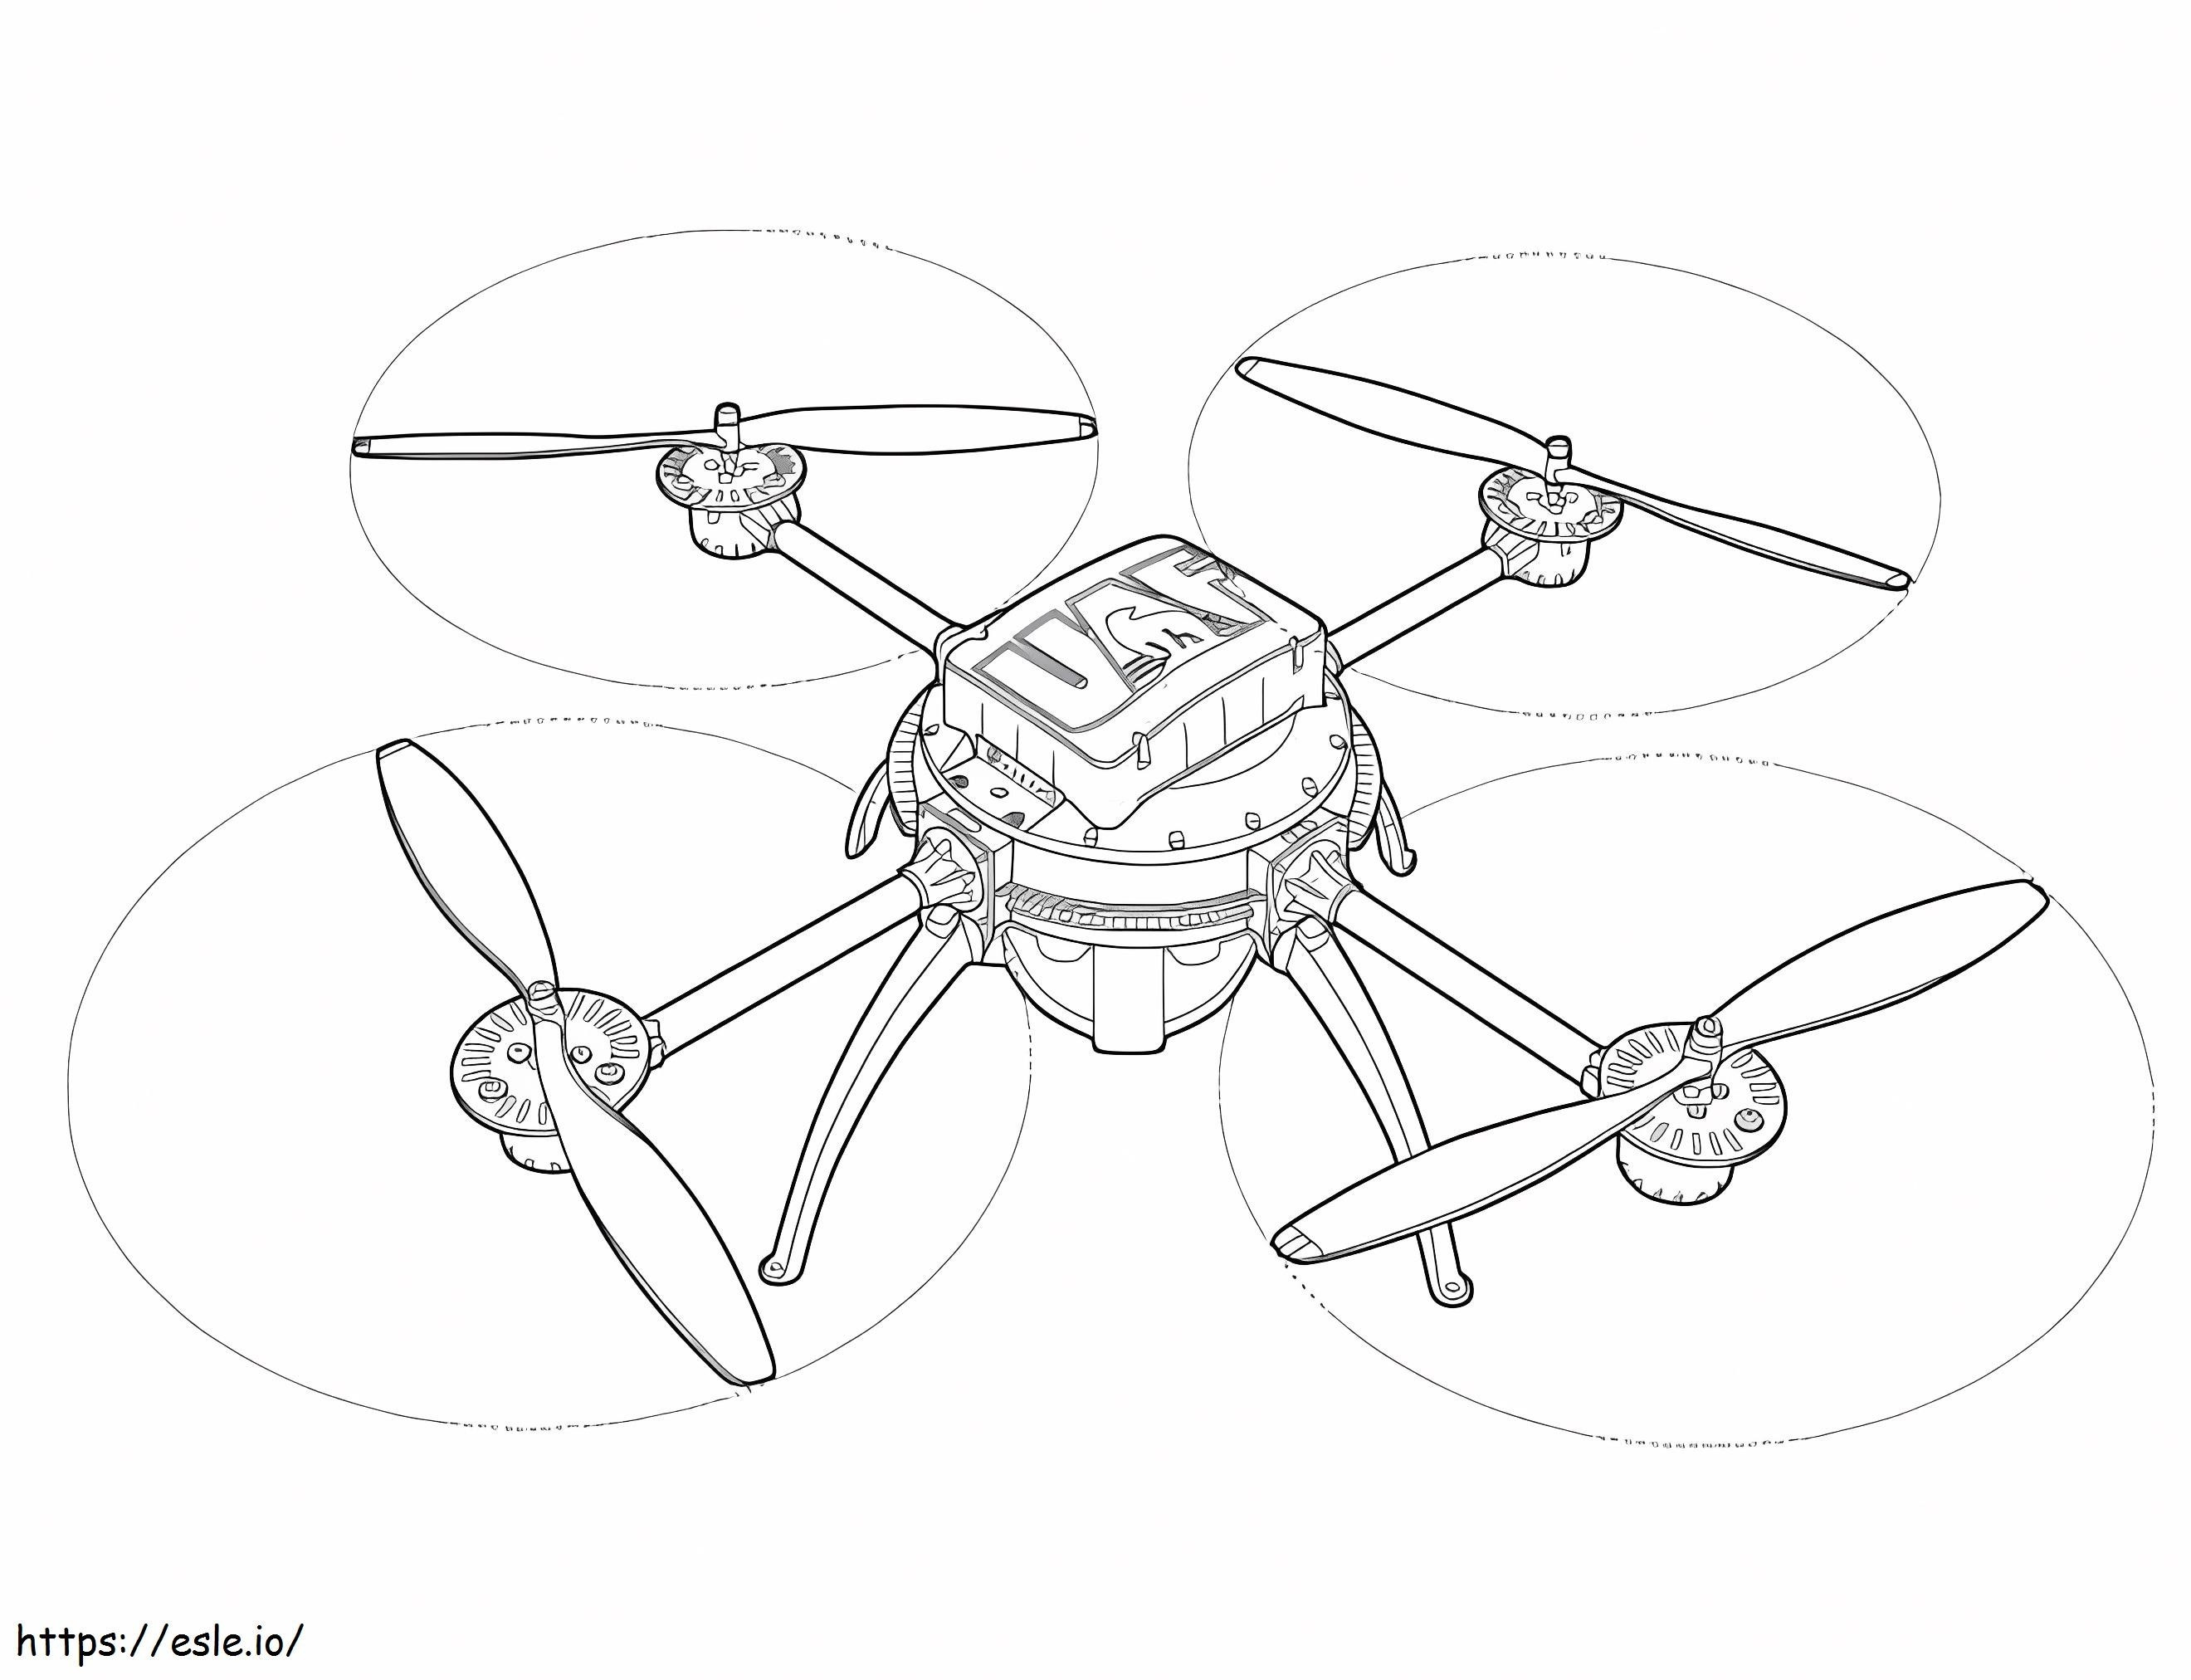 Nice Drone coloring page